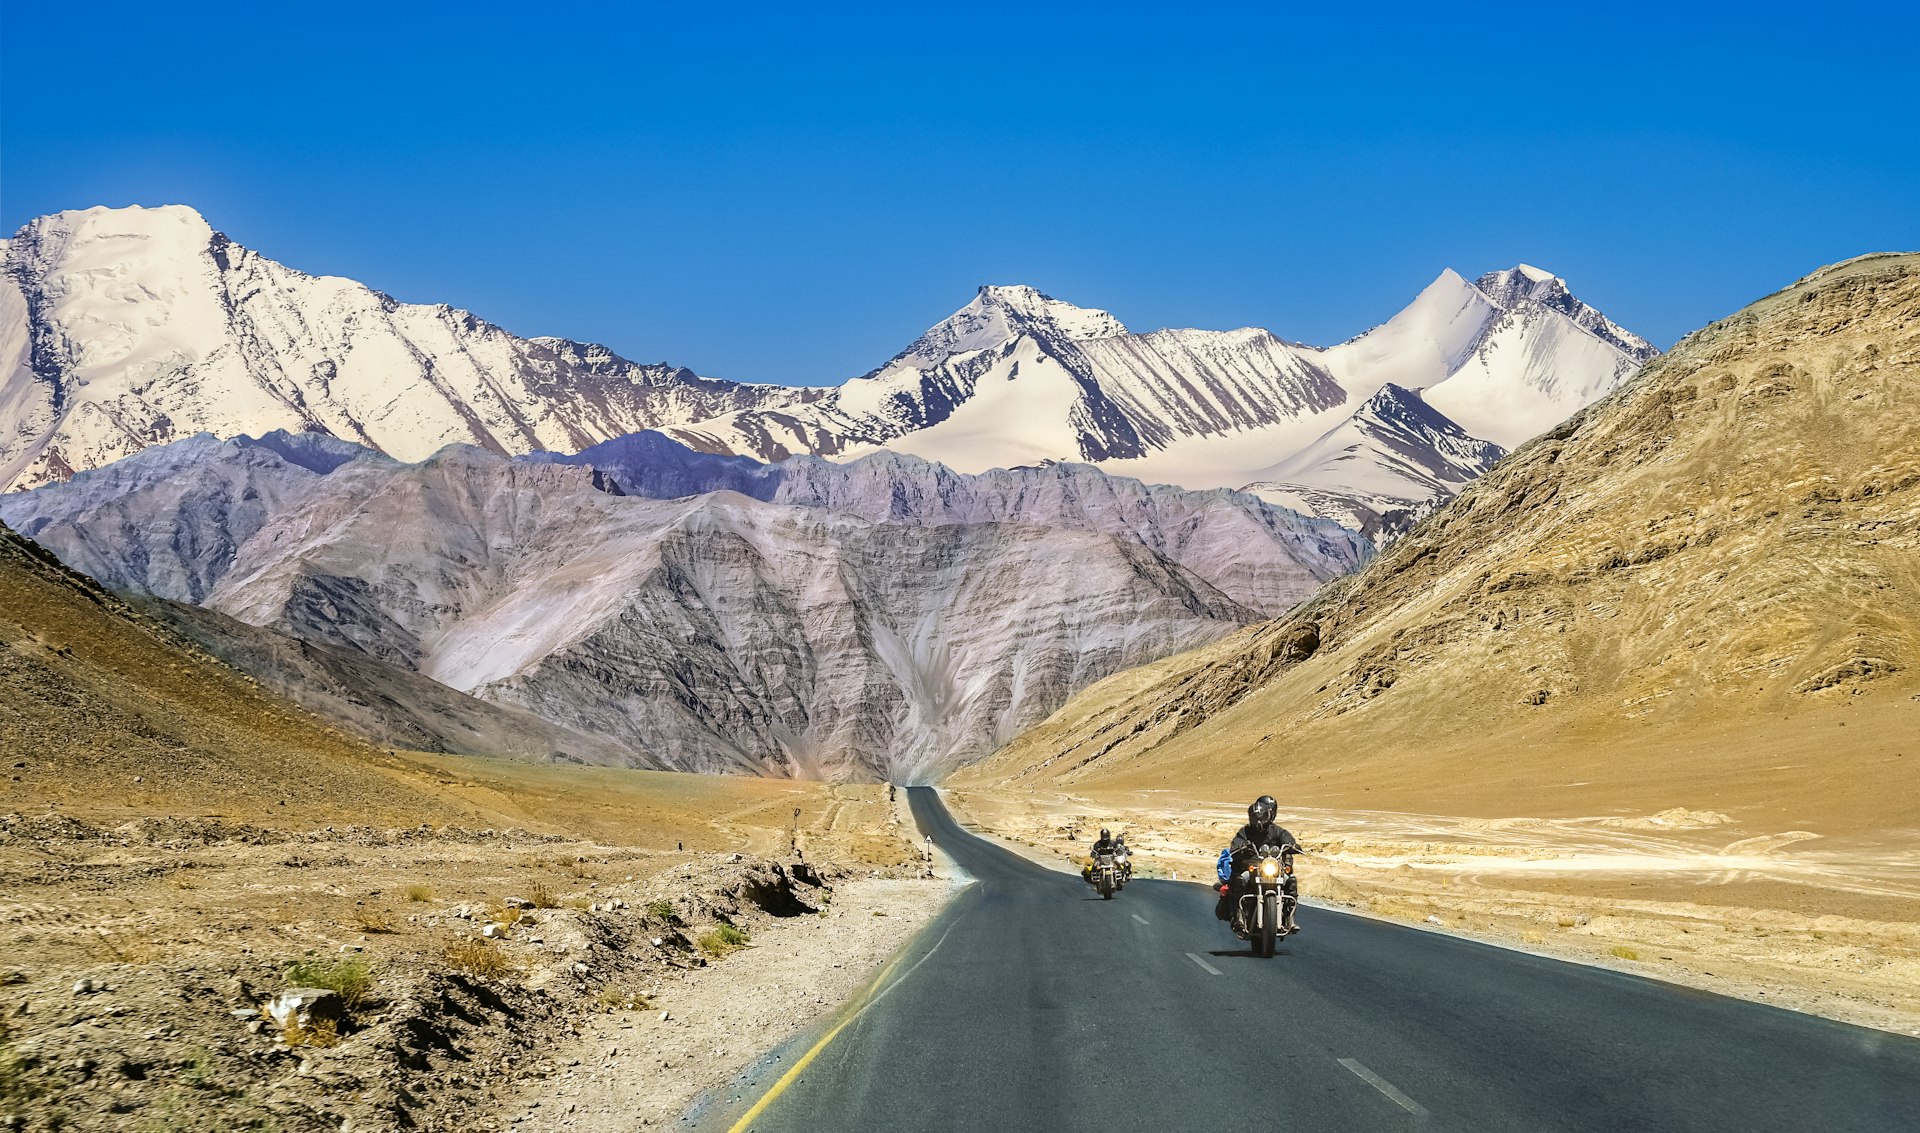 Motorcyclists on a highway with mountains in the distance, Ladakh, India